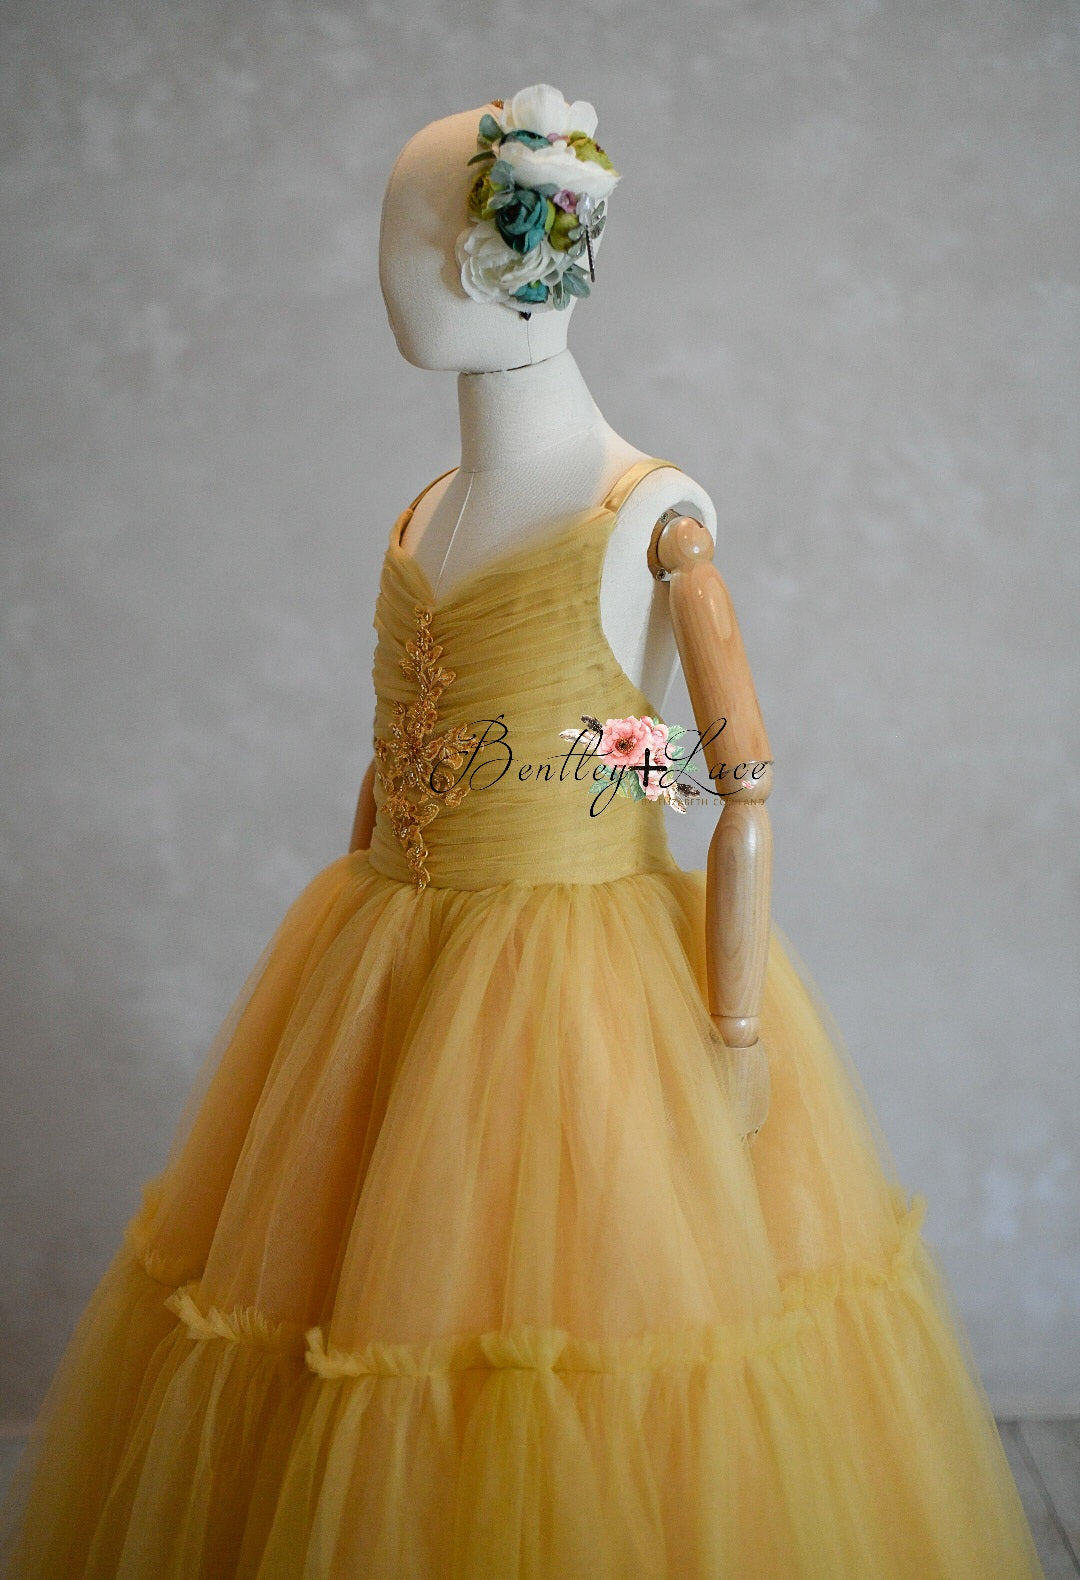 Hillary/Frenchie Solid gown- no applique choose color Editorial Dress, Couture Gown, Special Occasion Dress